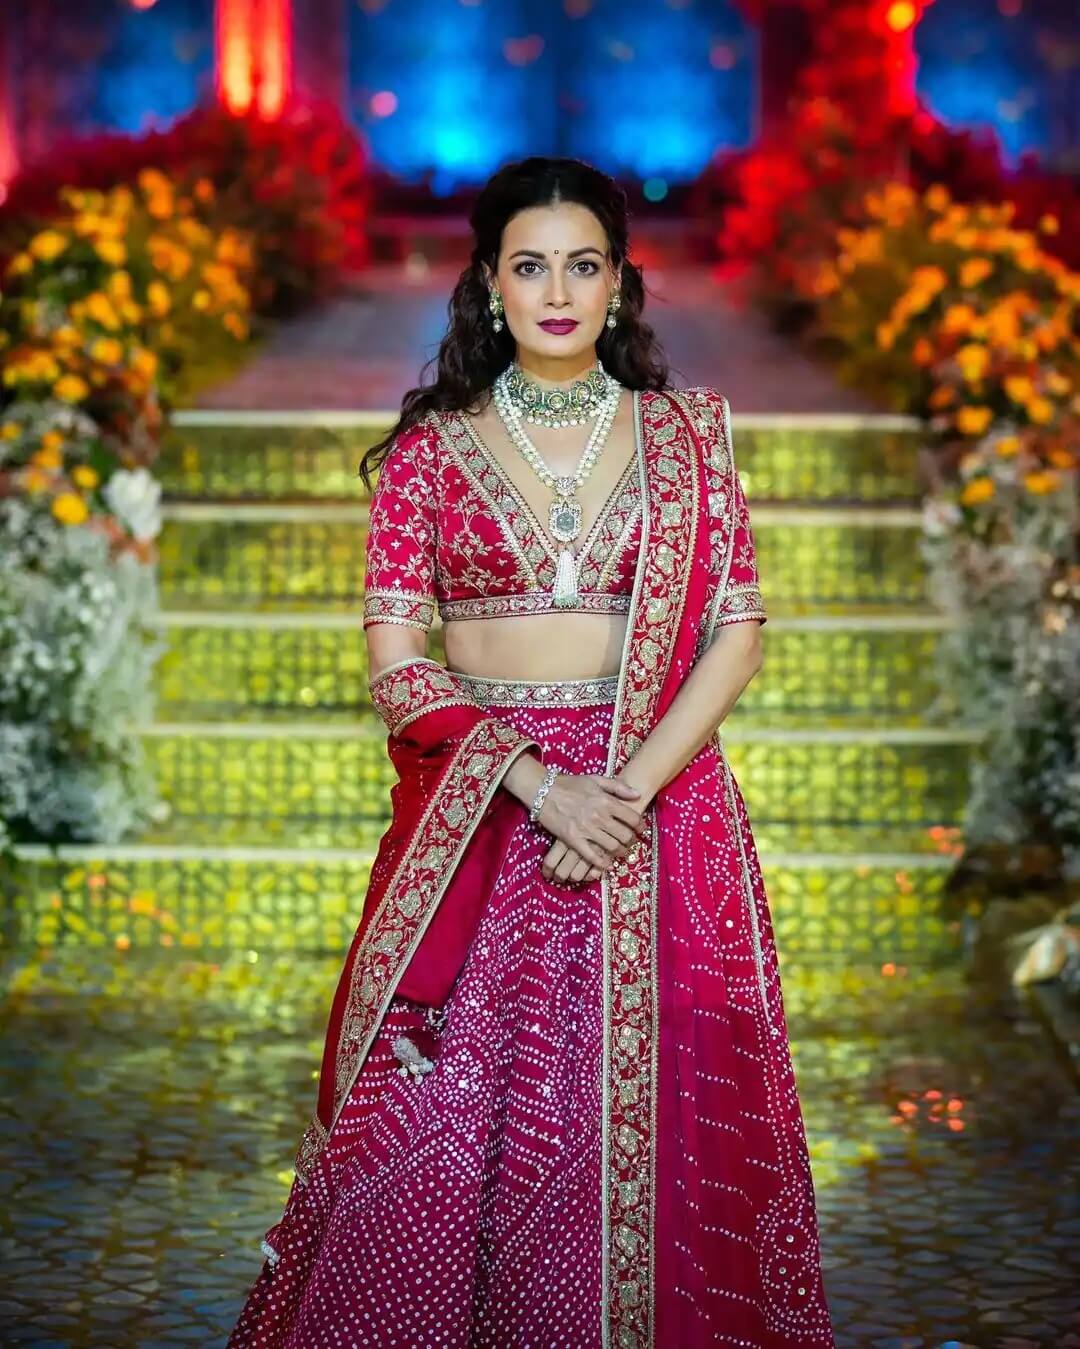 Dia Mirza looks bold, elegant, and graceful in the vibrant red color lehenga set